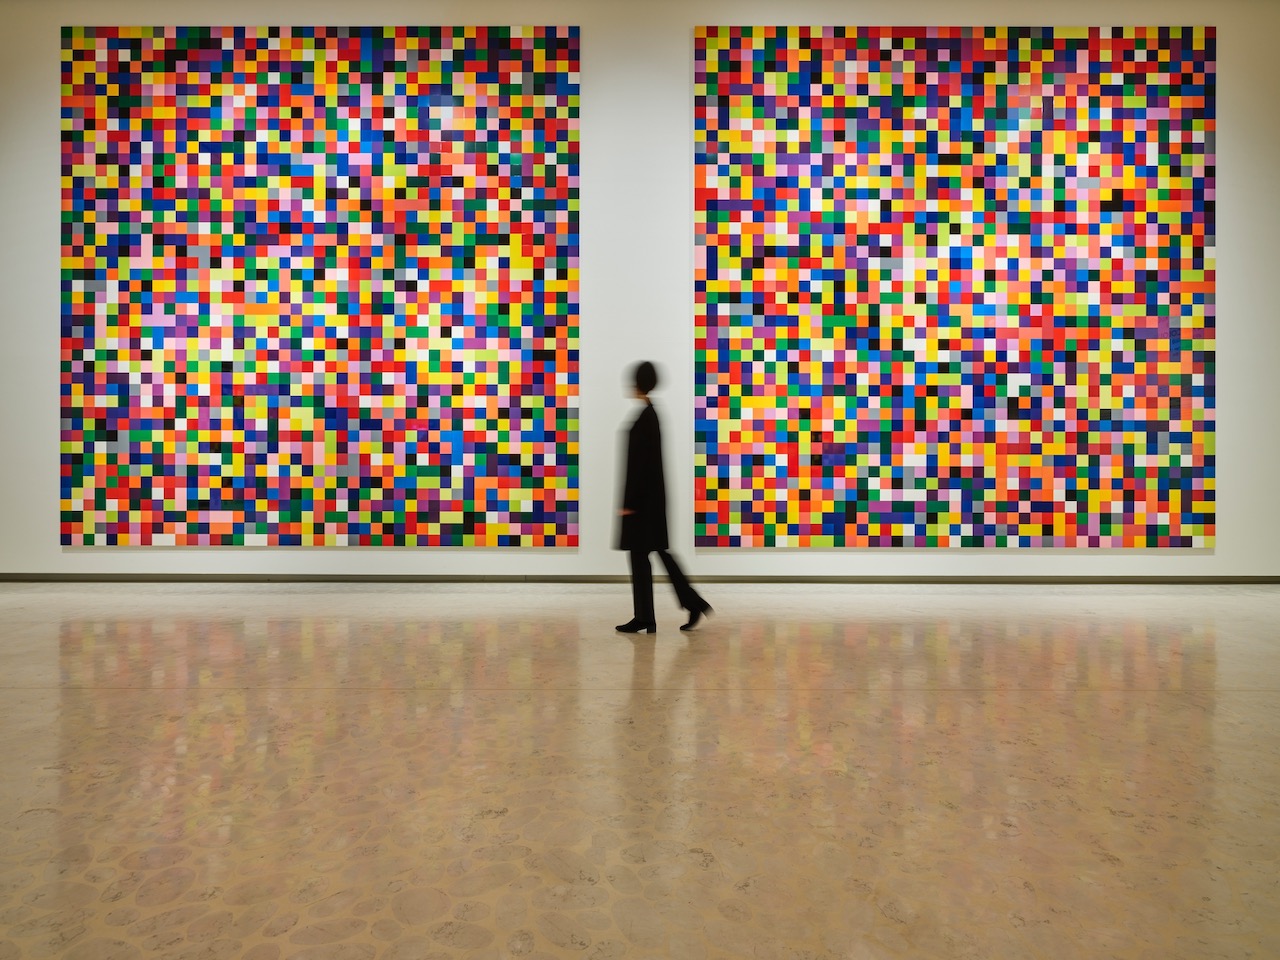 Gerhard Richter - the most expensive living artist in Europe (continuation)